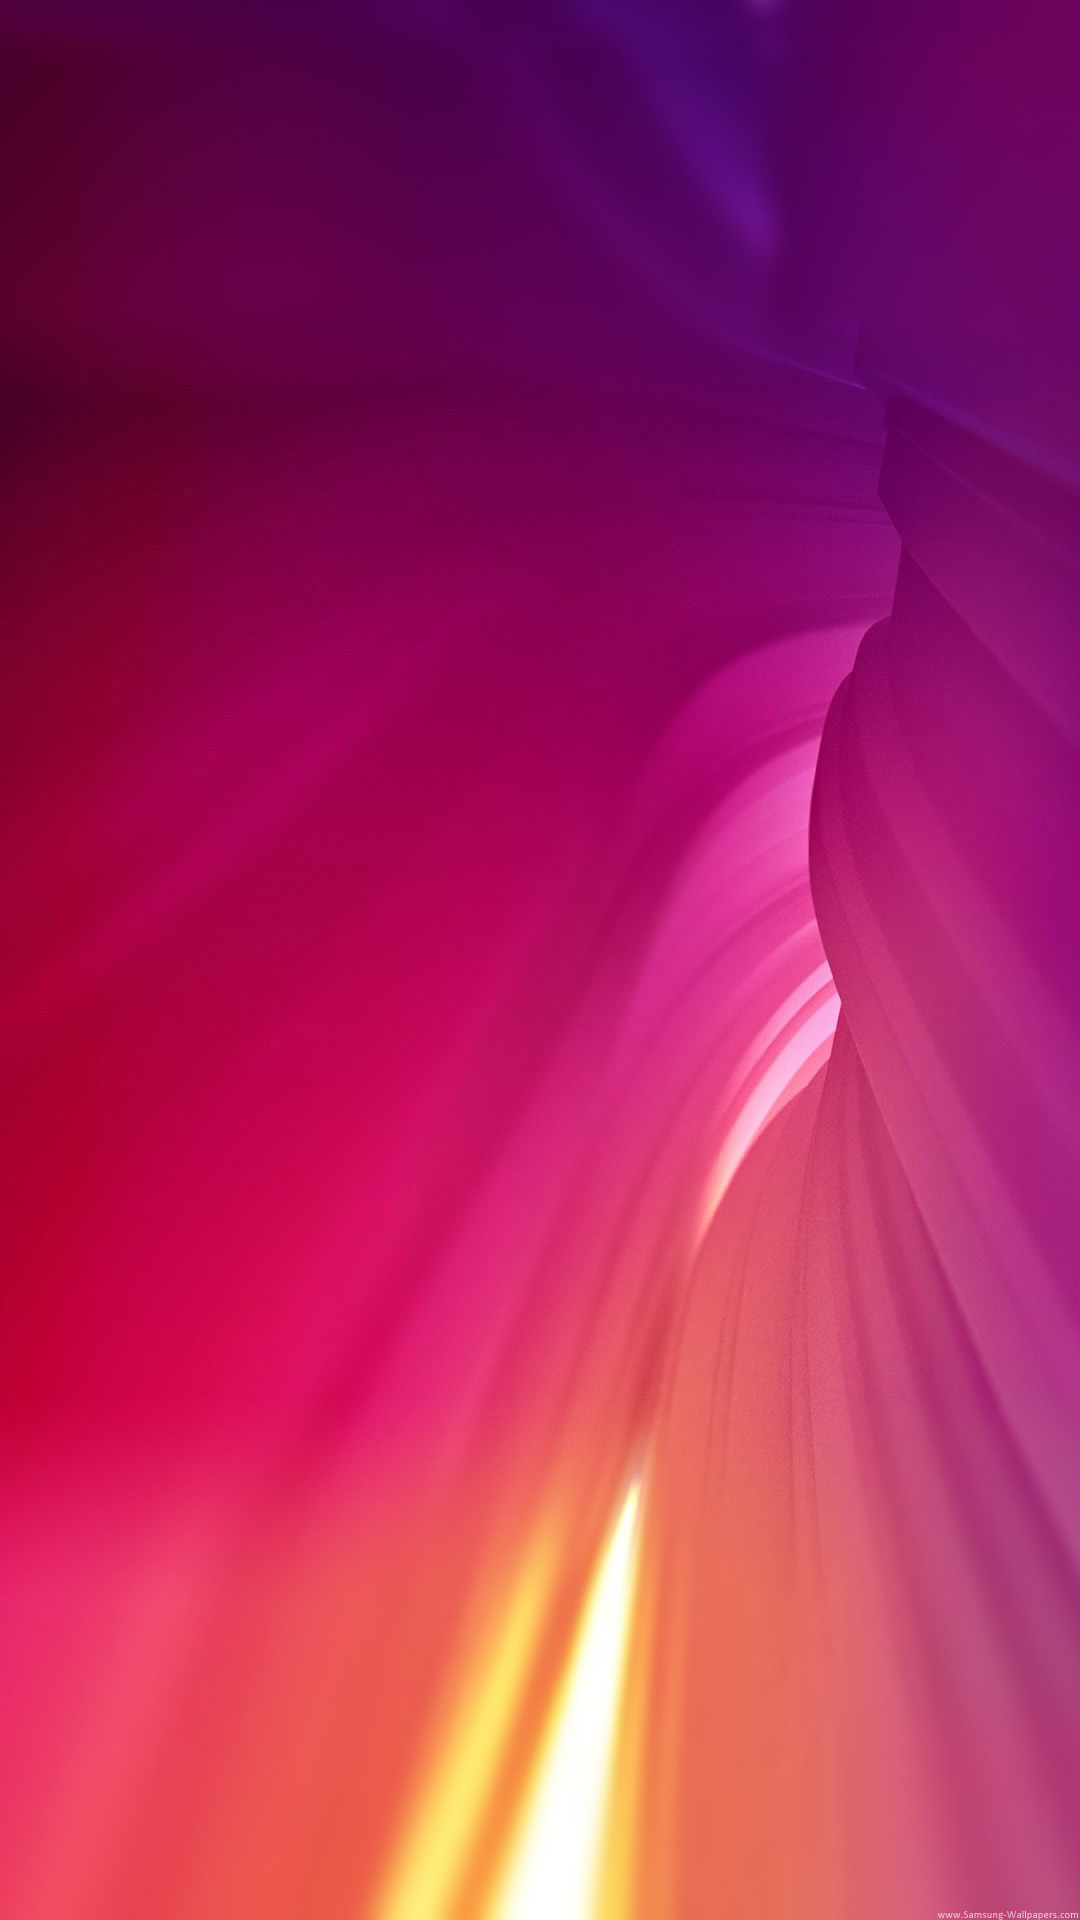 Free Download Nexus7 Wallpapers By Stock Wallpapers 1080x19 For Your Desktop Mobile Tablet Explore 45 Nexus 7 Wallpaper Downloads Download Free Nexus Wallpapers Nexus 7 Wallpaper Size Nexus 7 Wallpapers App